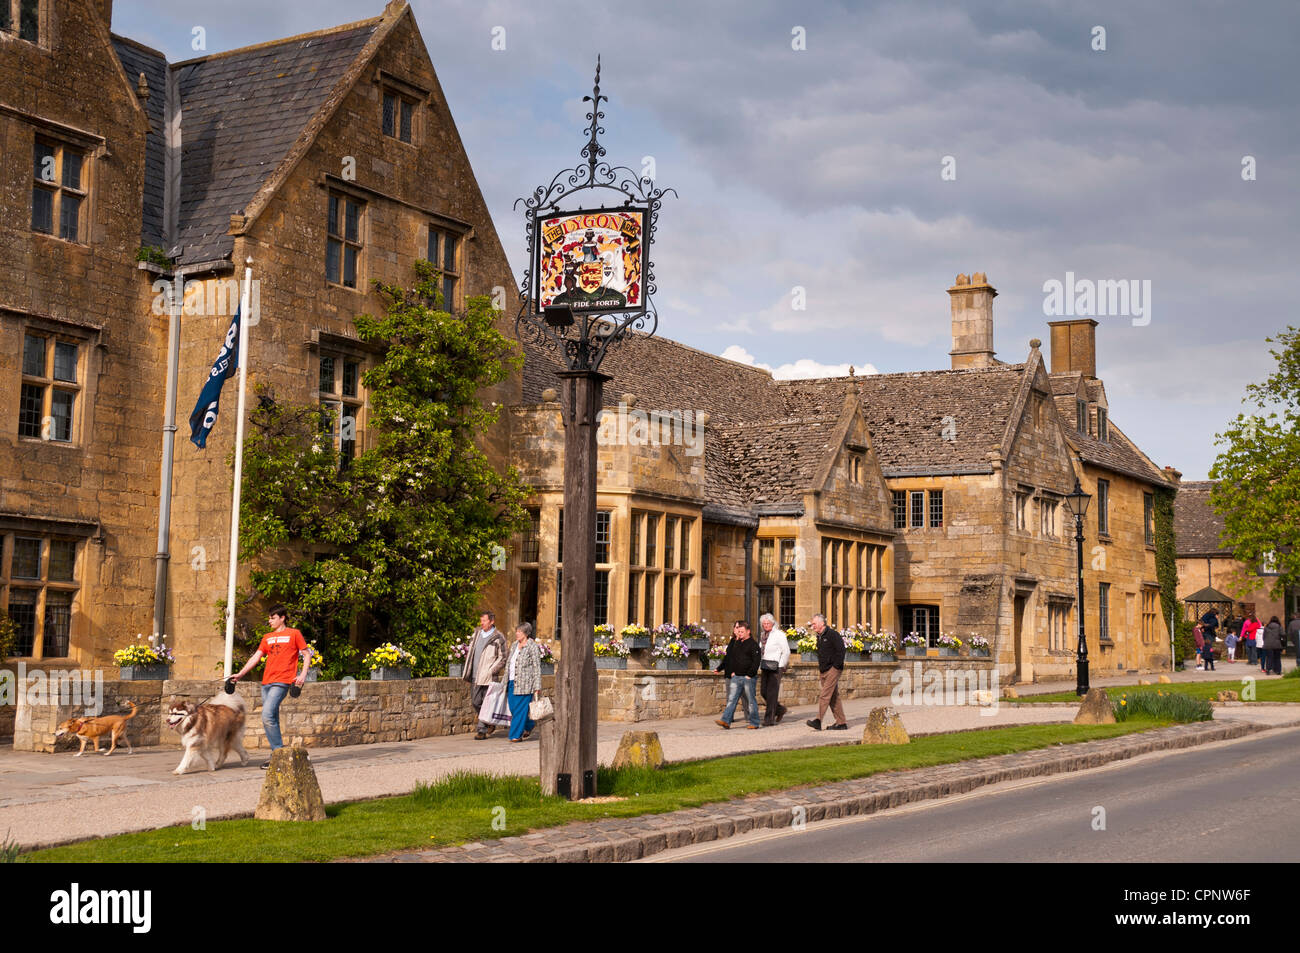 The Lygon Arms Inn, Broadway, Worcestershire, Cotswolds Stock Photo